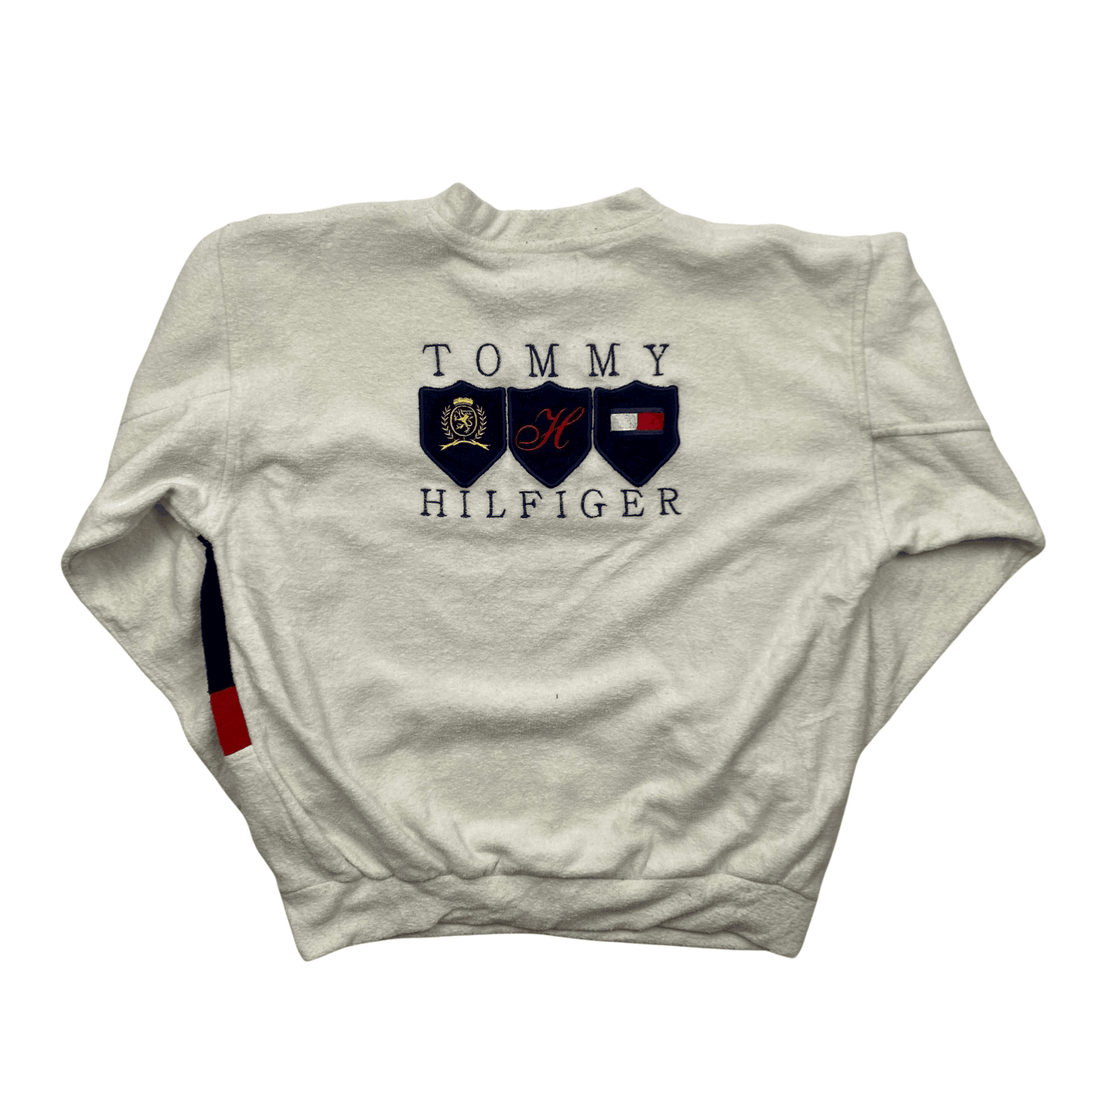 Vintage 90s White, Navy Blue + Red Tommy Hilfiger Spell-Out Fleece Sweatshirt - Small - The Streetwear Studio